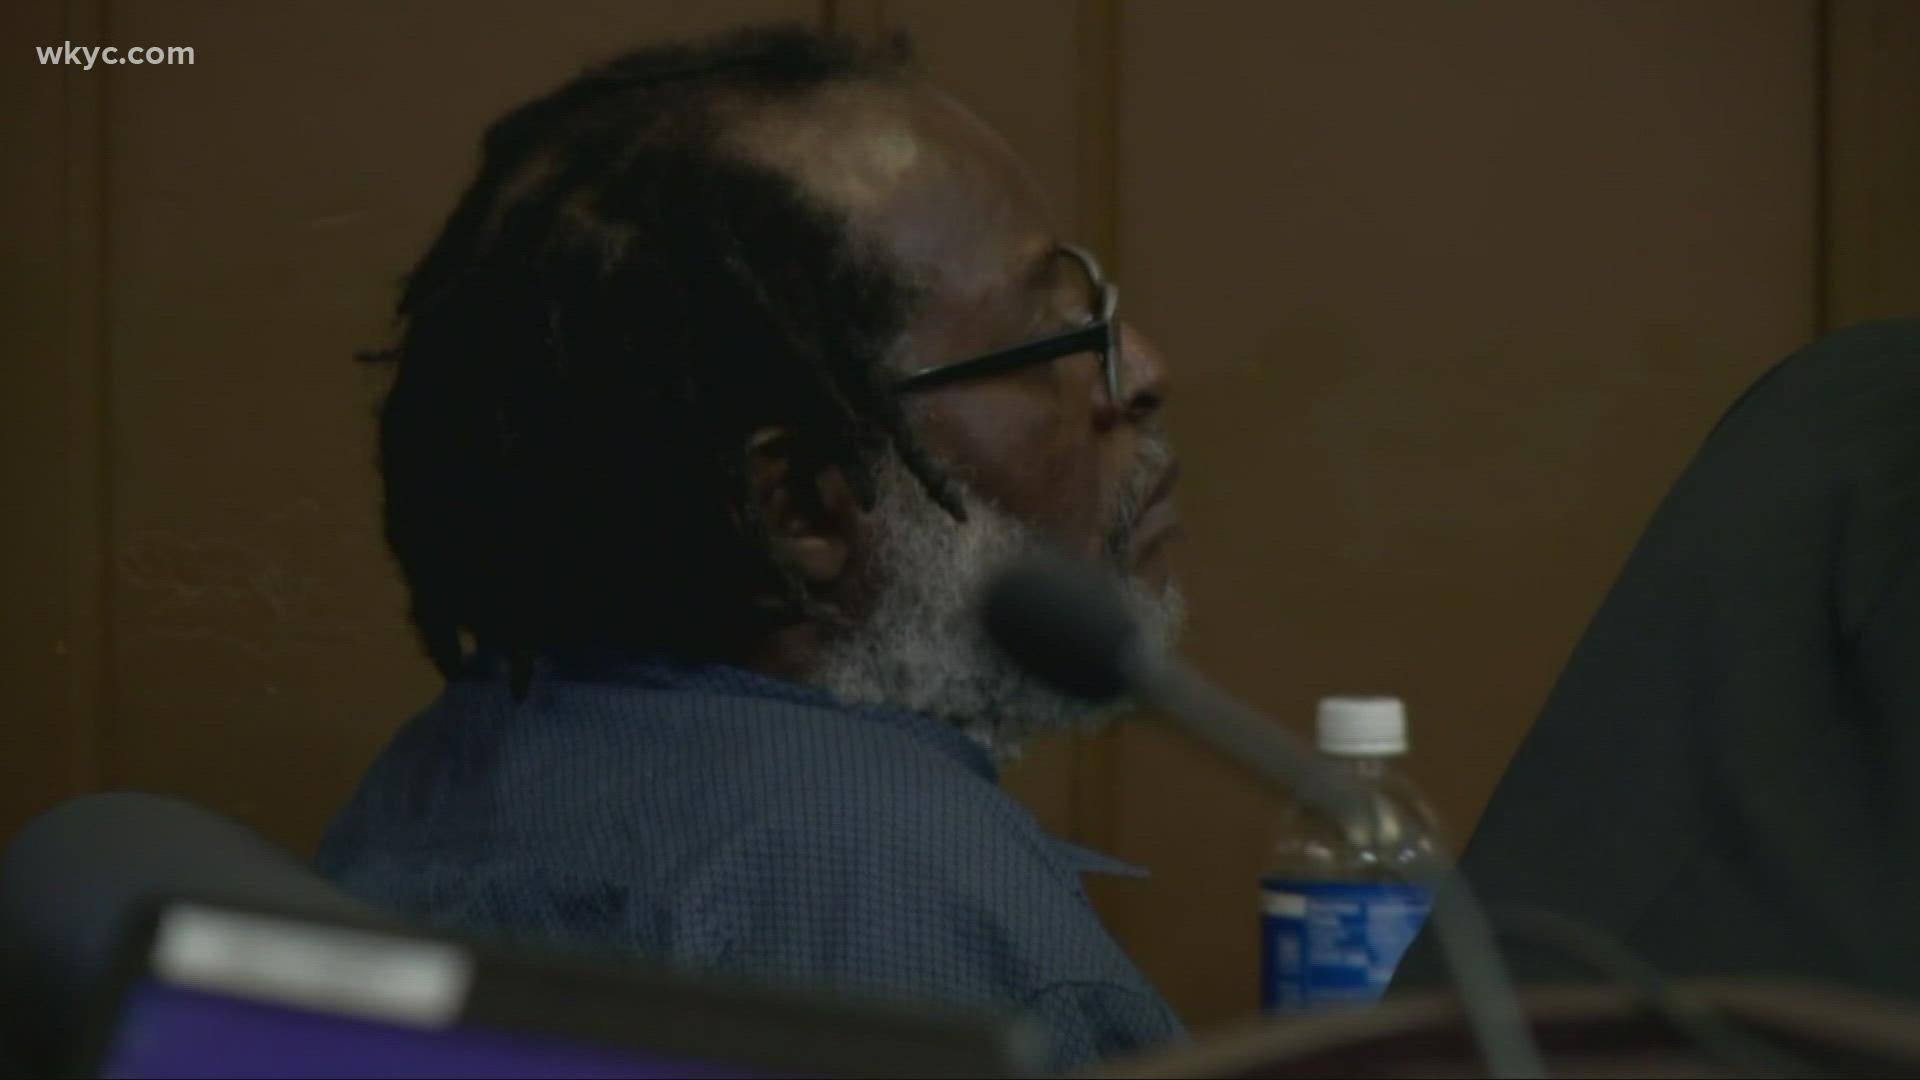 Stanley Ford was found guilty Tuesday night to aggravated murder. More details at wkyc.com